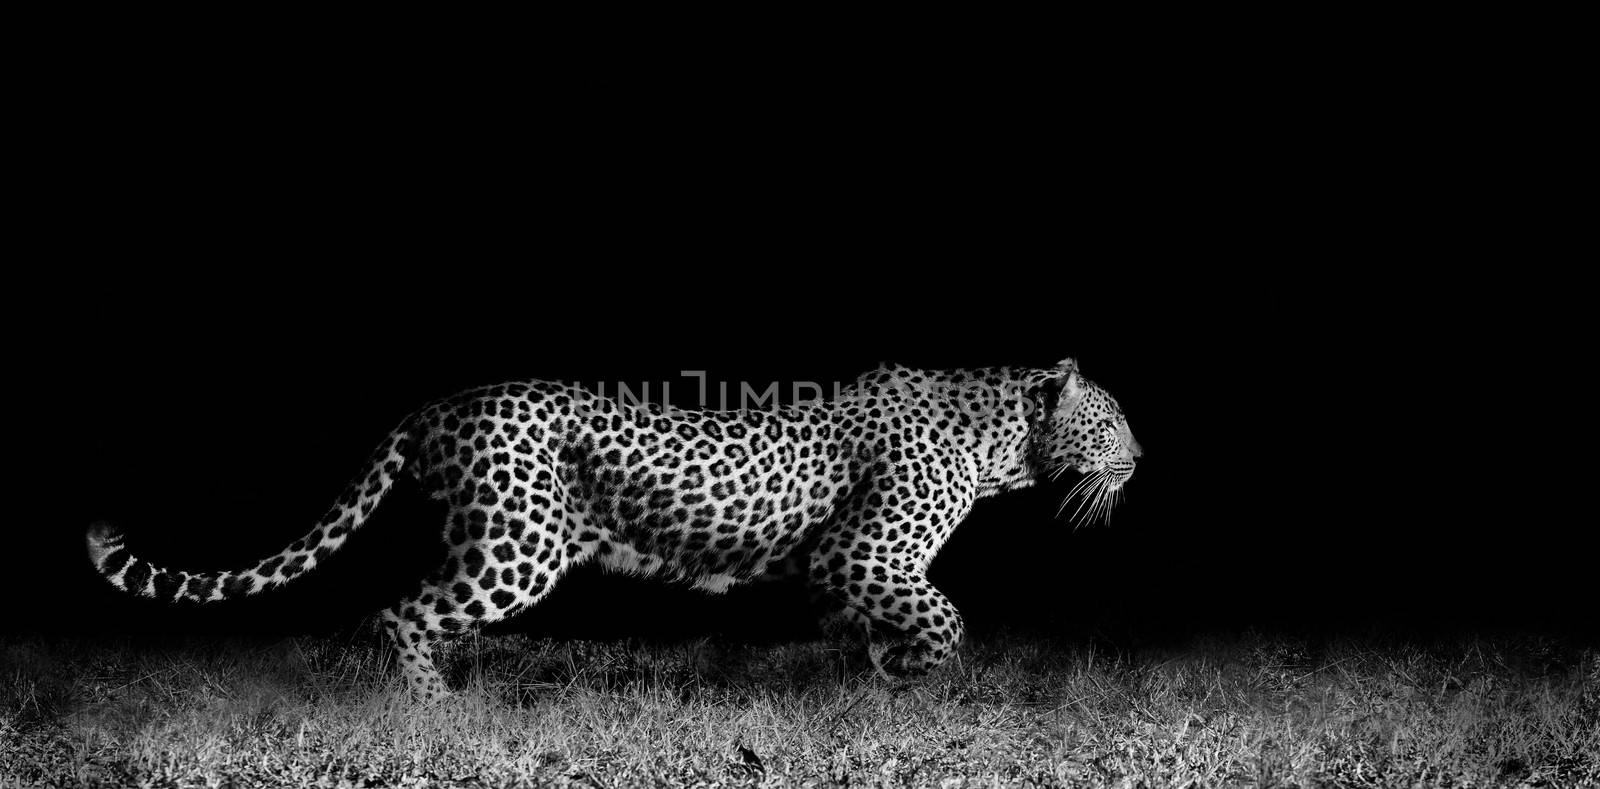 Black and white image of a wild African leopard stalking